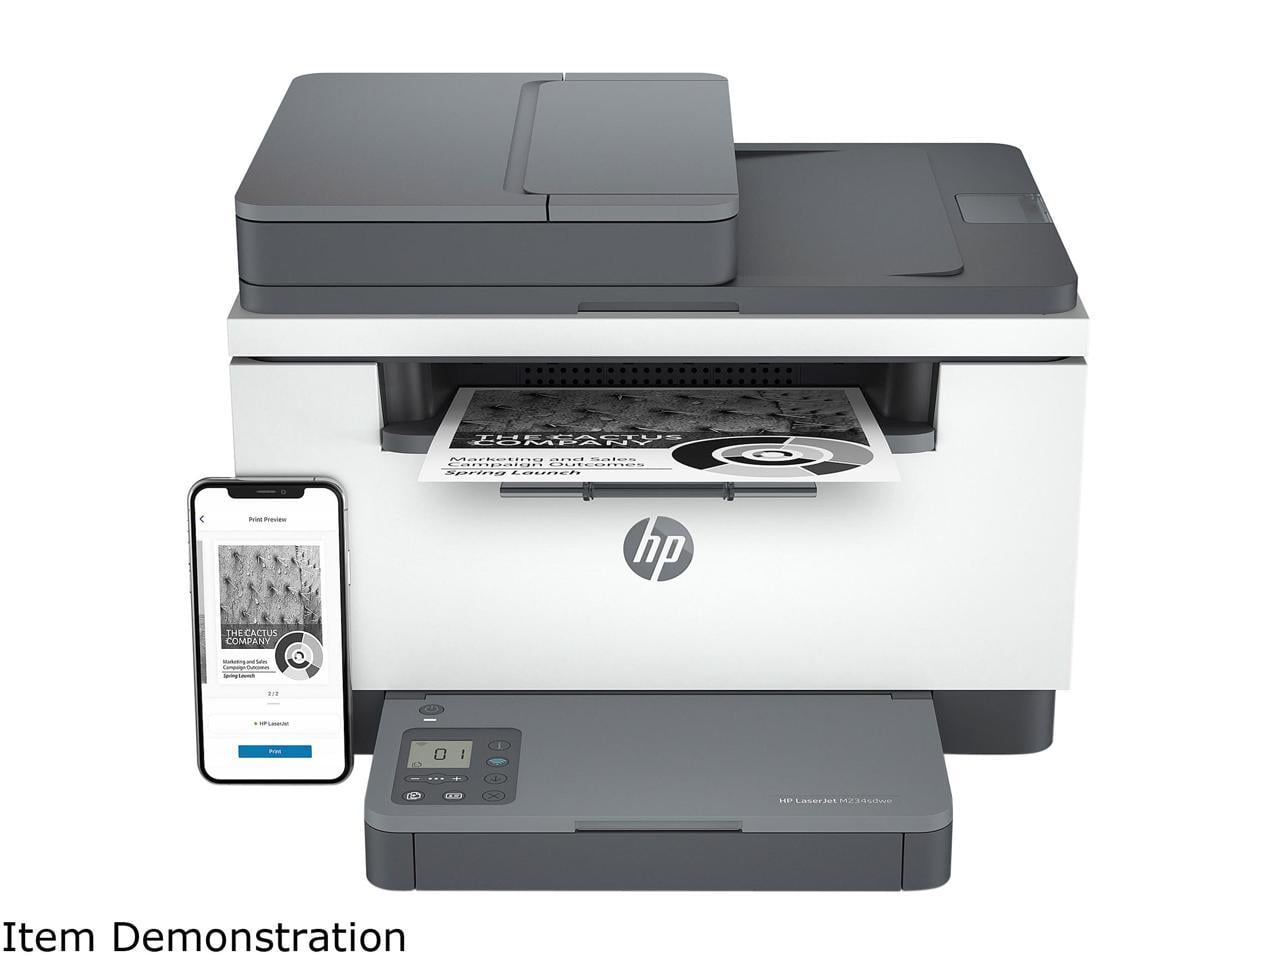 HP Color Laser MFP 178nw Printer Review - Consumer Reports